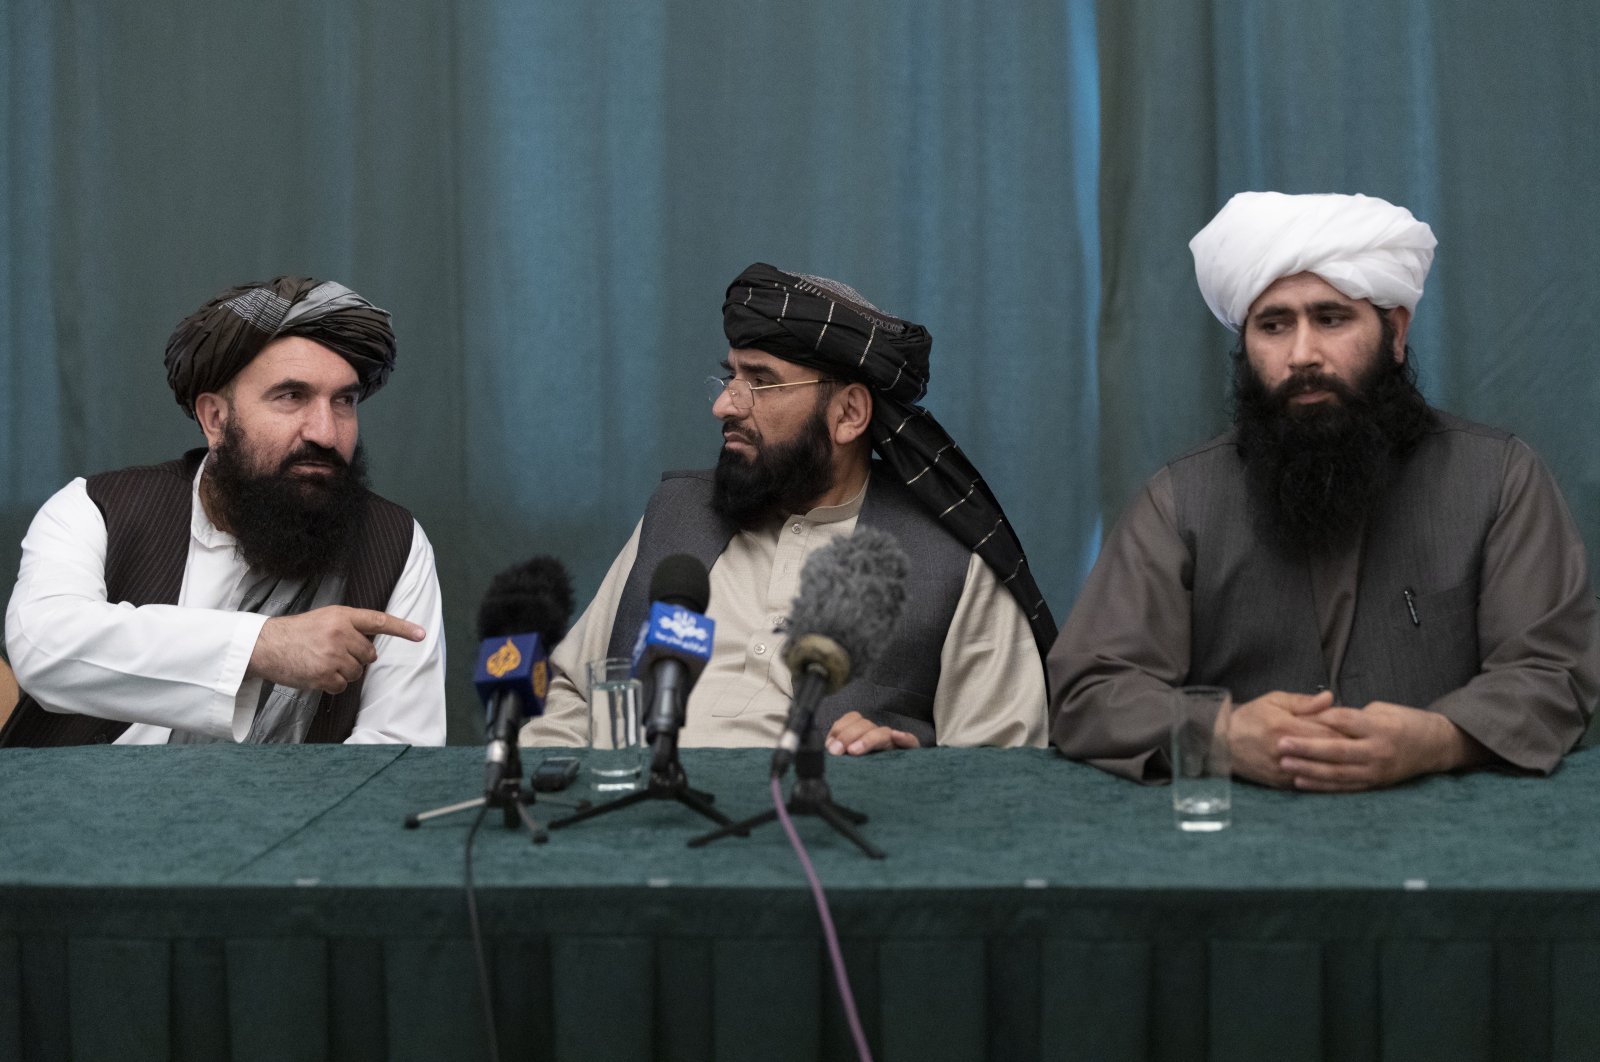 Members of the Taliban delegation warned Washington against defying the May 1 deadline for the withdrawal of American and NATO troops from Afghanistan promising a "reaction," which presumably meant stepped up fighting, in a news conference in Moscow, Russia, March 19, 2021. (EPA)